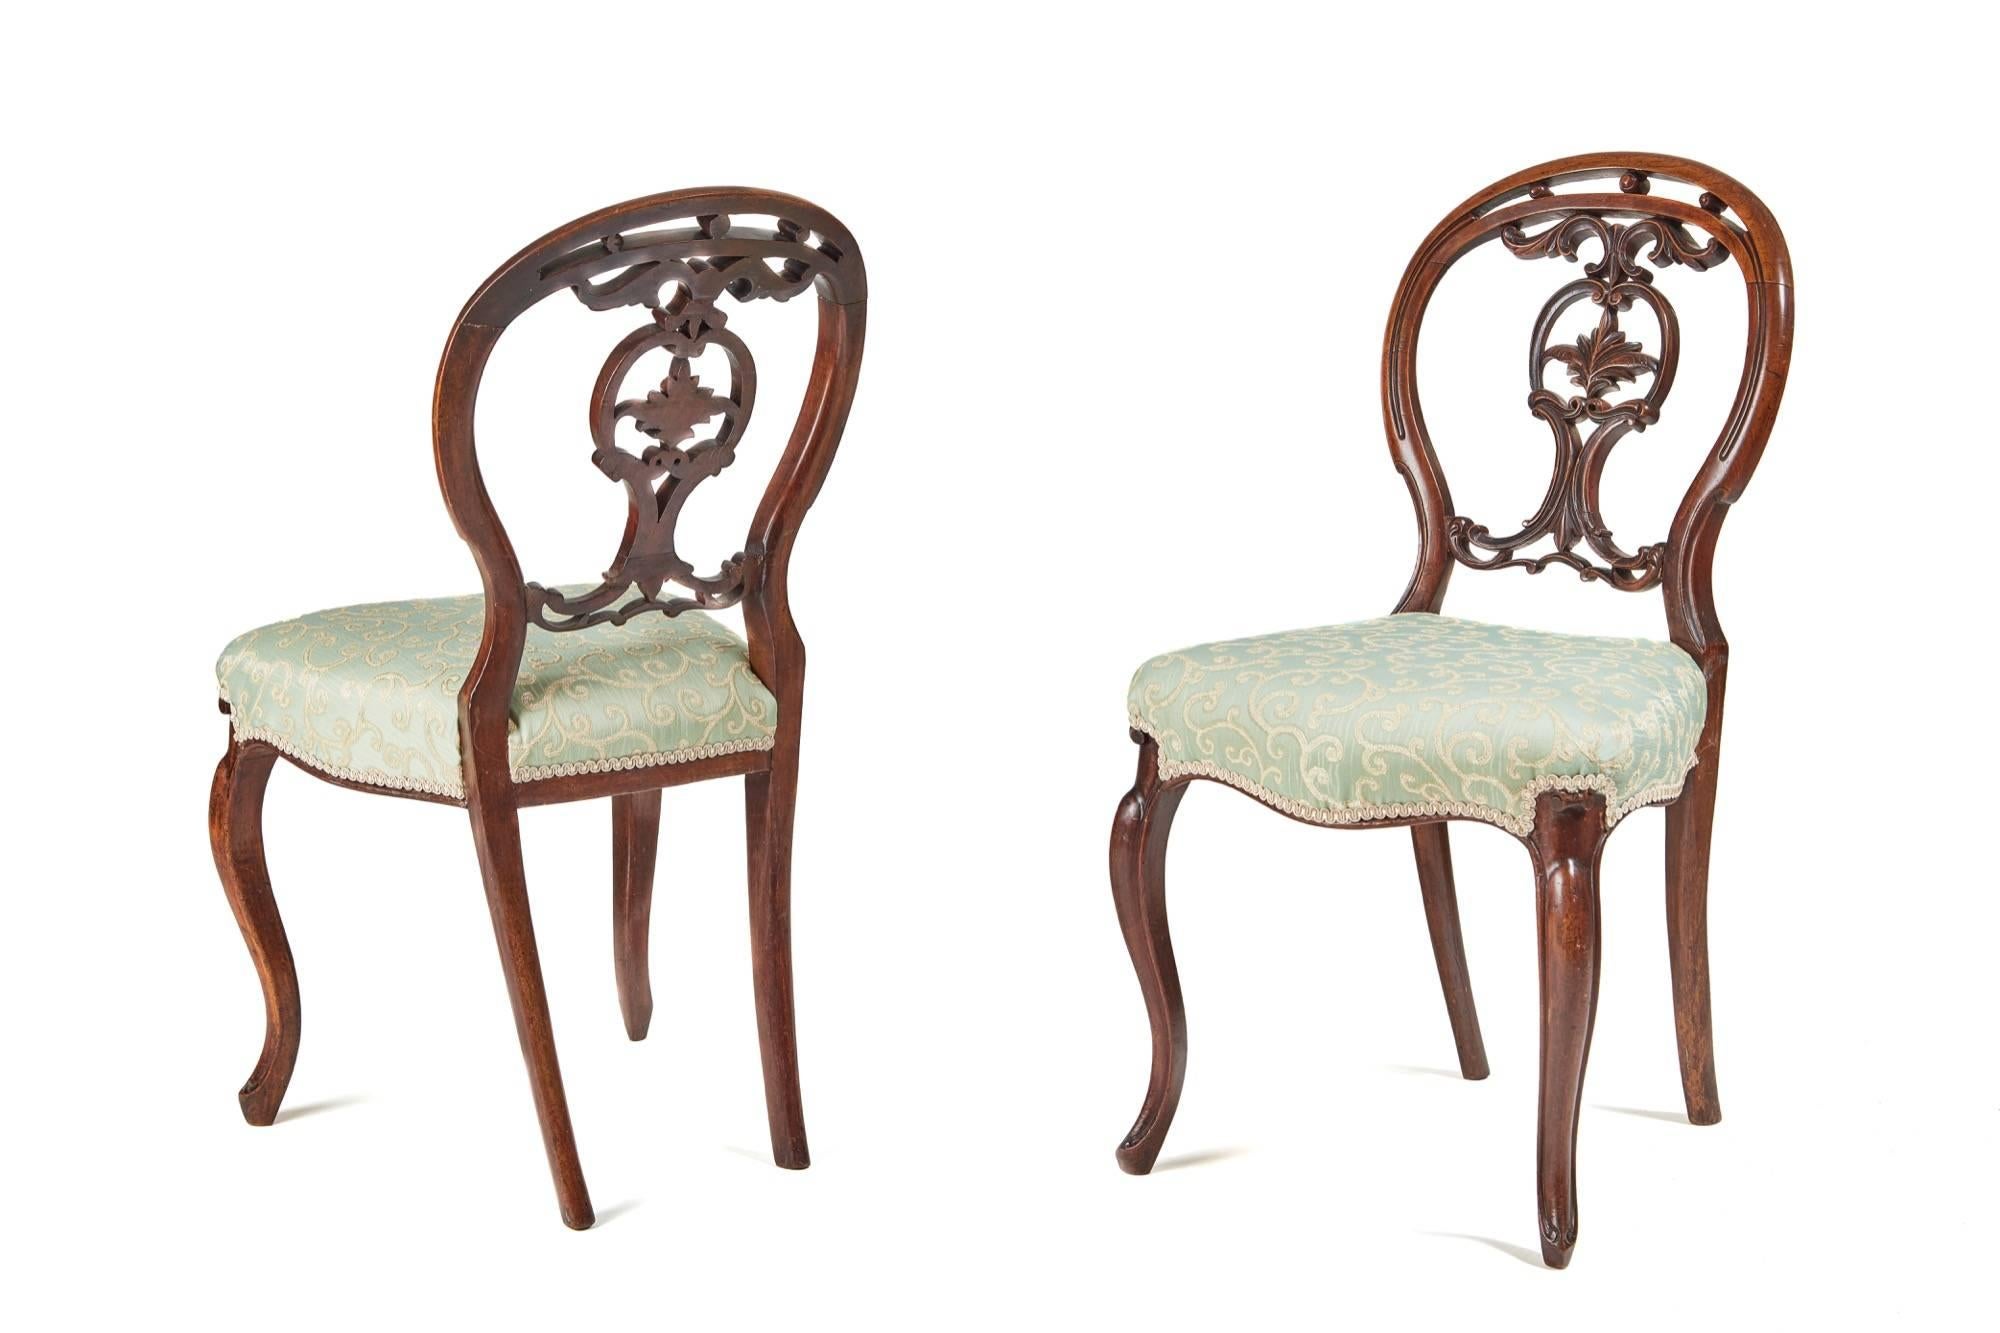 An elegant set of six Victorian walnut dining chairs, the balloon back having a nice carved centre, the seats are serpentine fronted and rest on a cabriole leg, the back legs are outswept these chairs have been newly re-upholstered.

Measures: